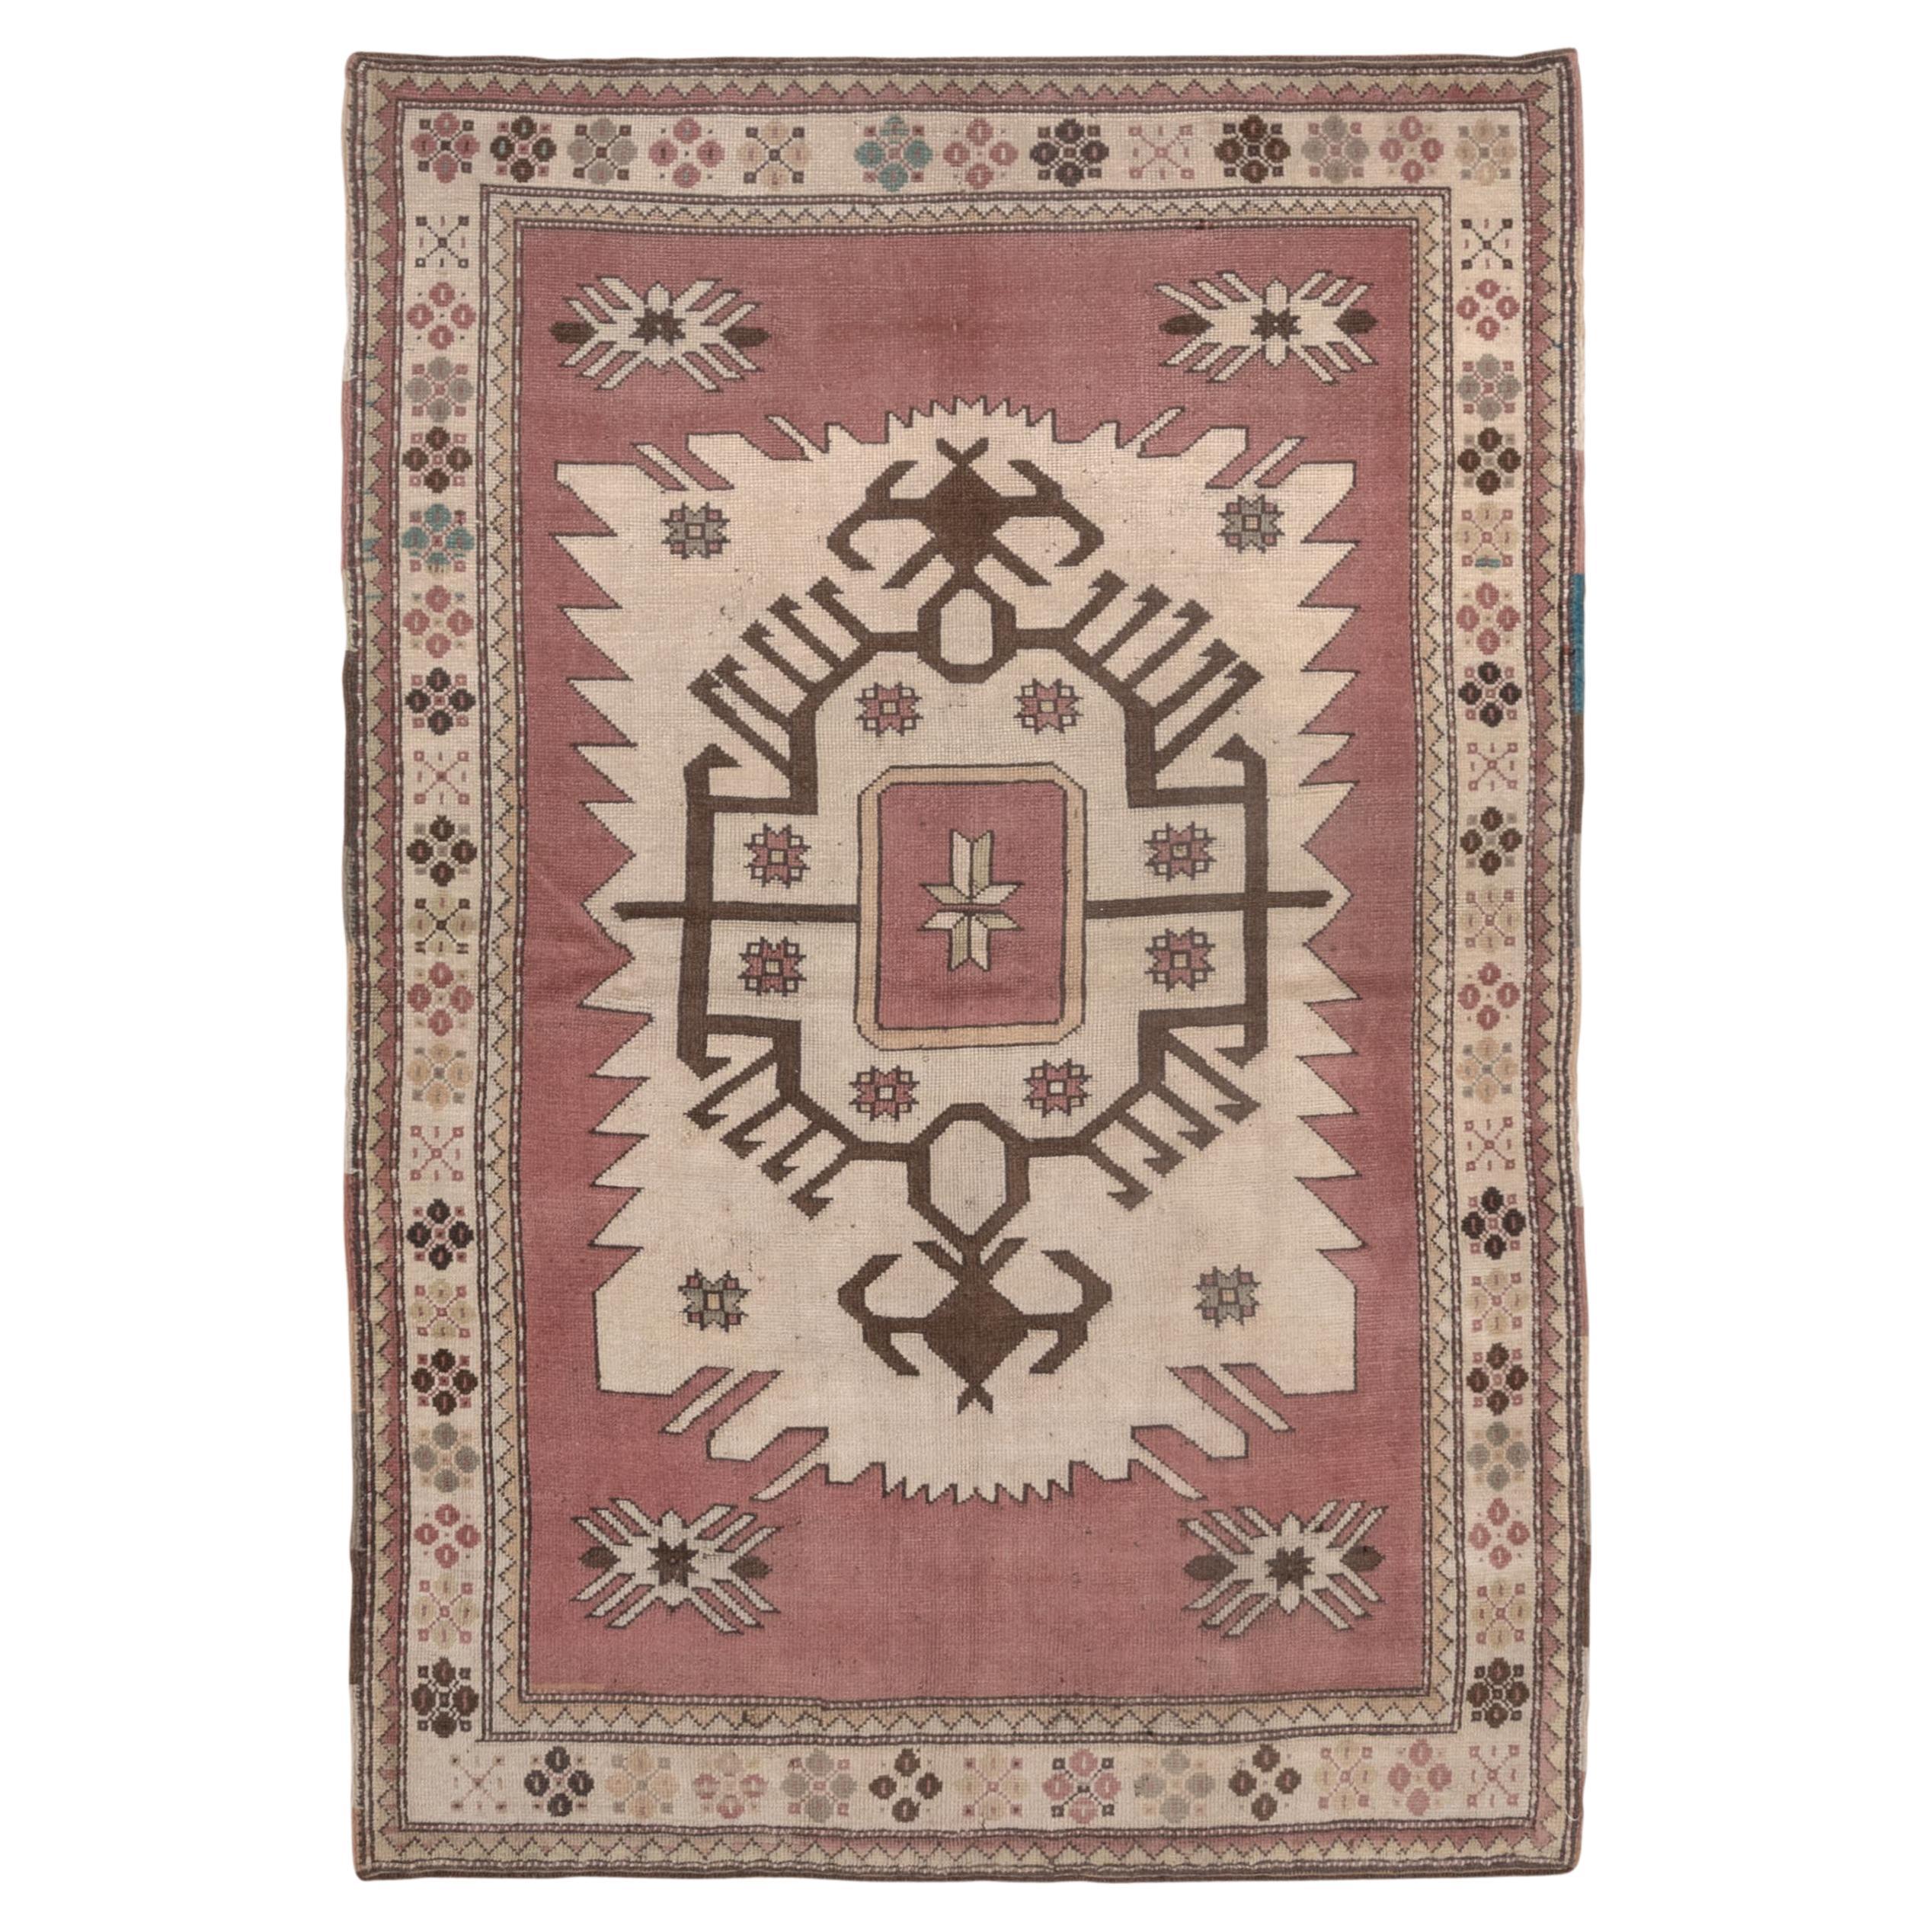 Tribal Medallion Antique Rug 1930s in Washed Brick Red